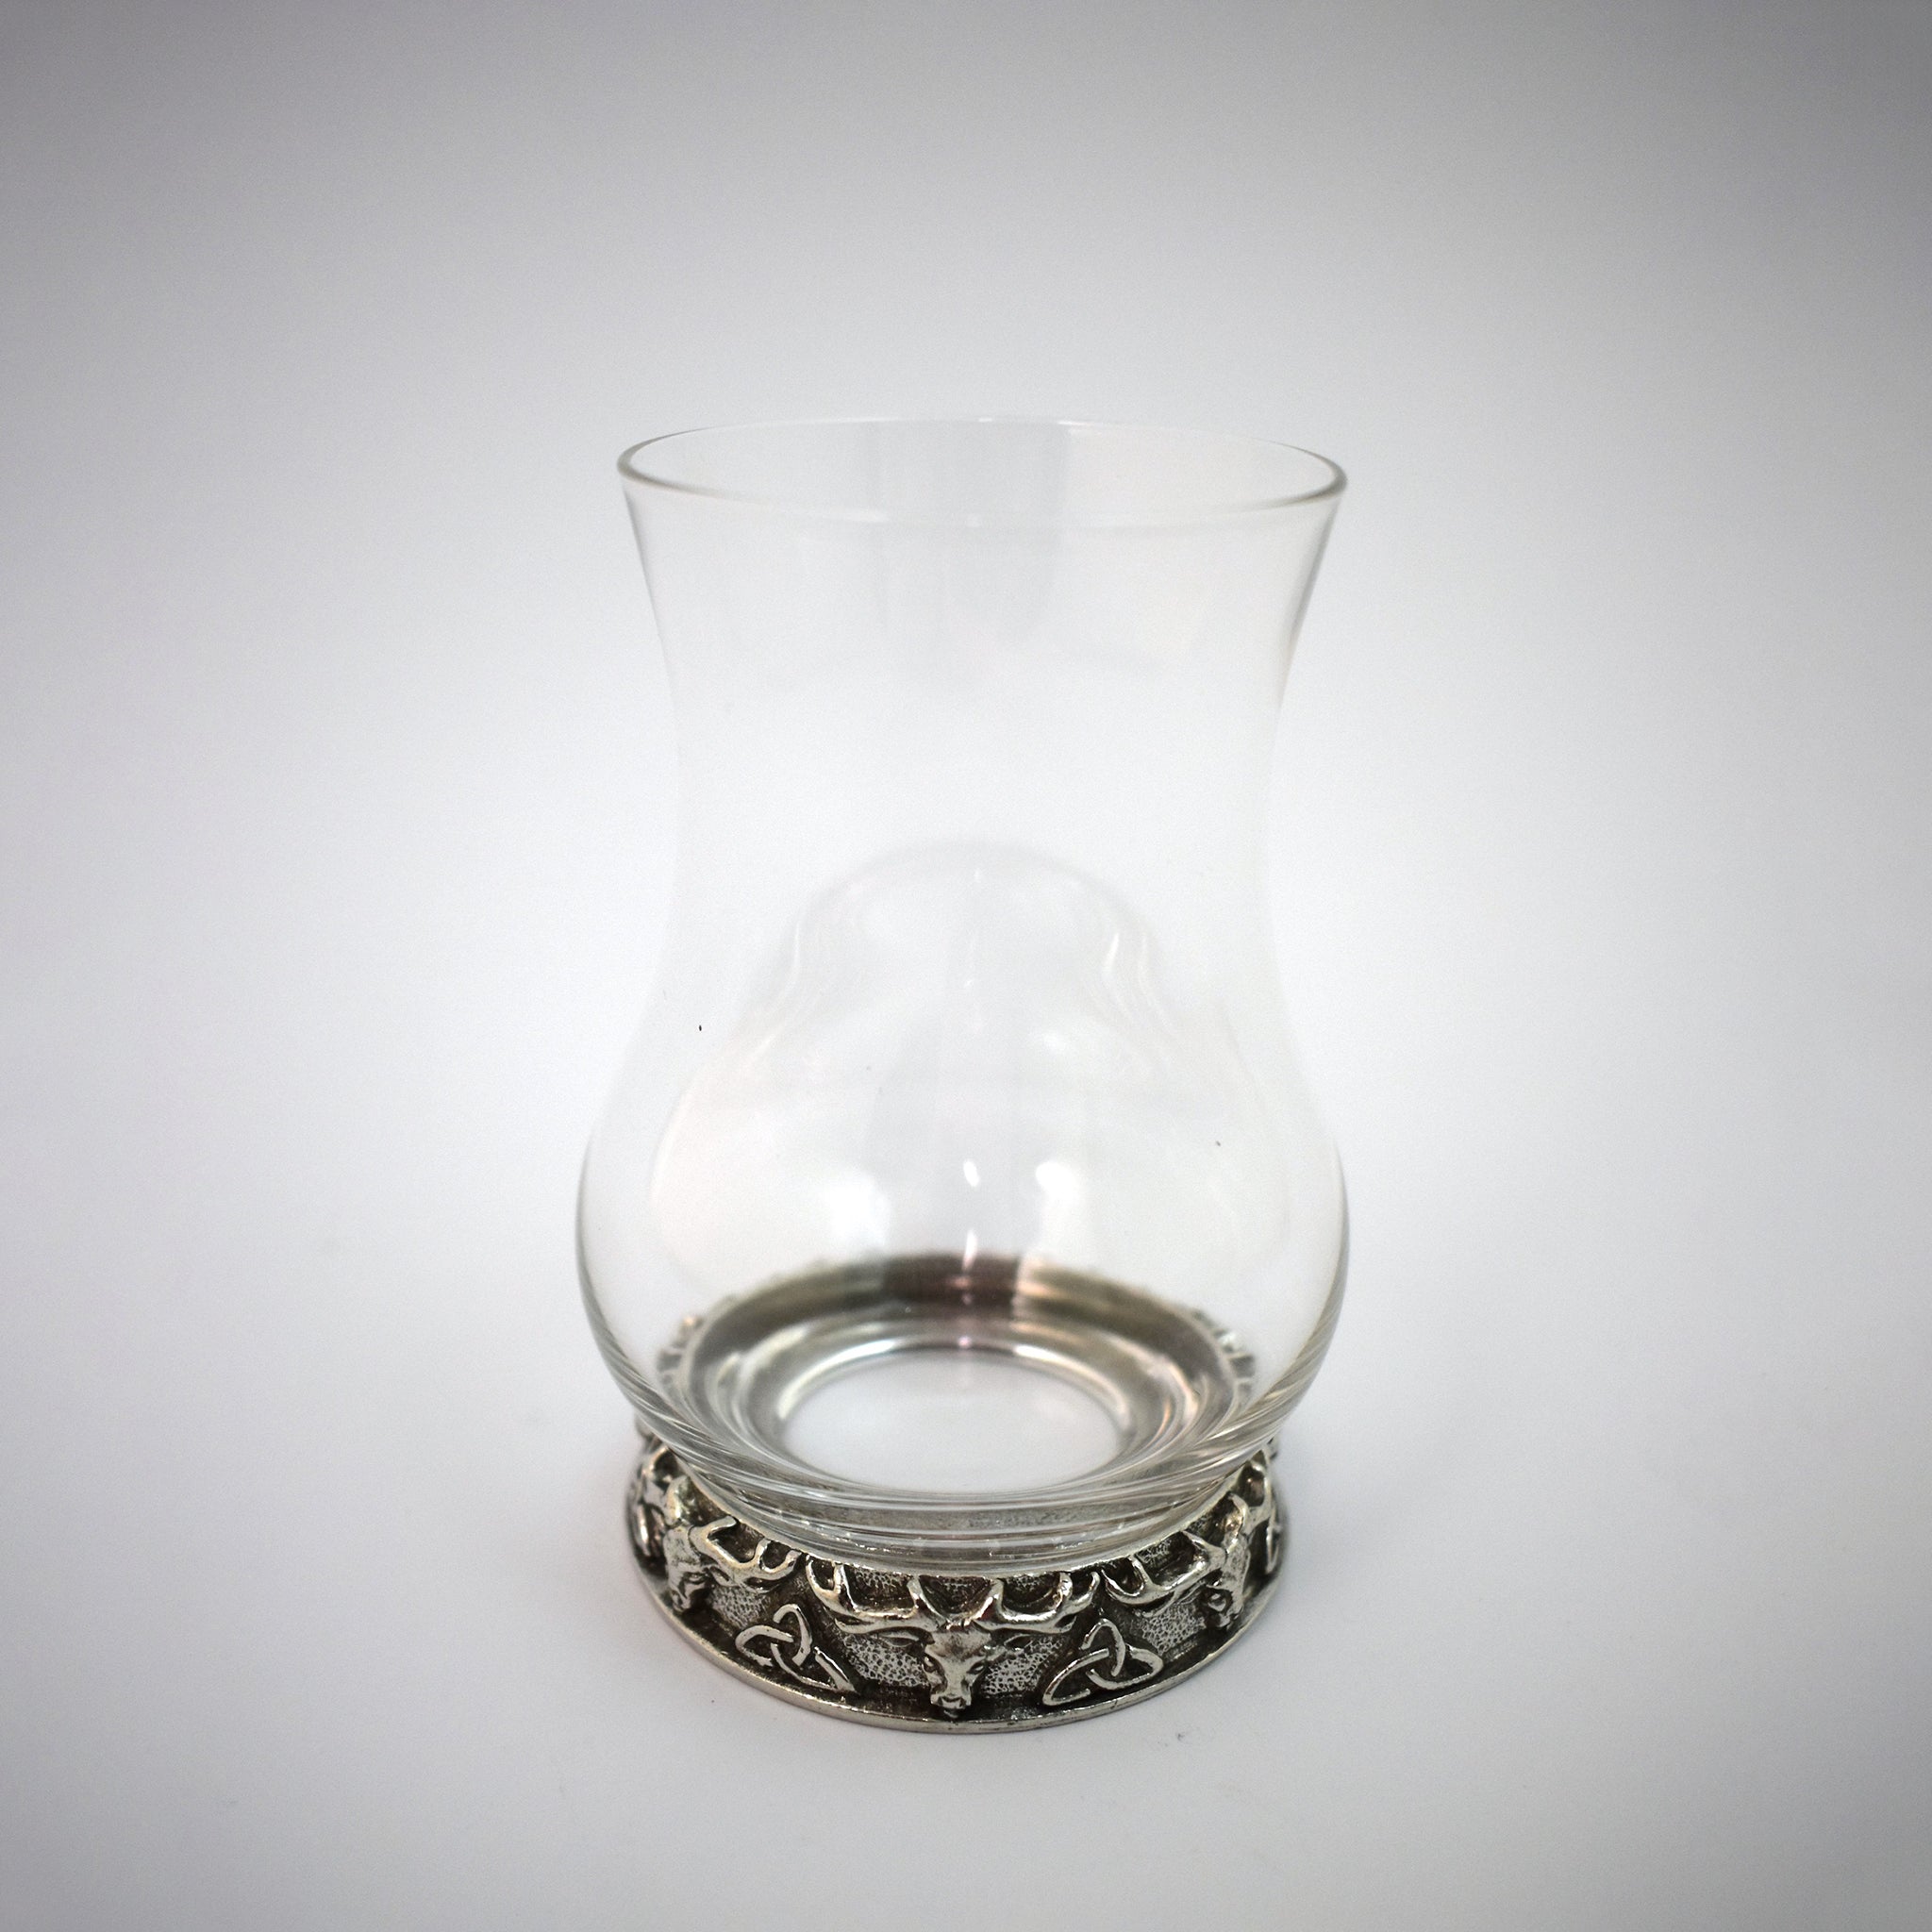 Glass whisky nosing glass with pewter base featuring stag heads and trinity knots